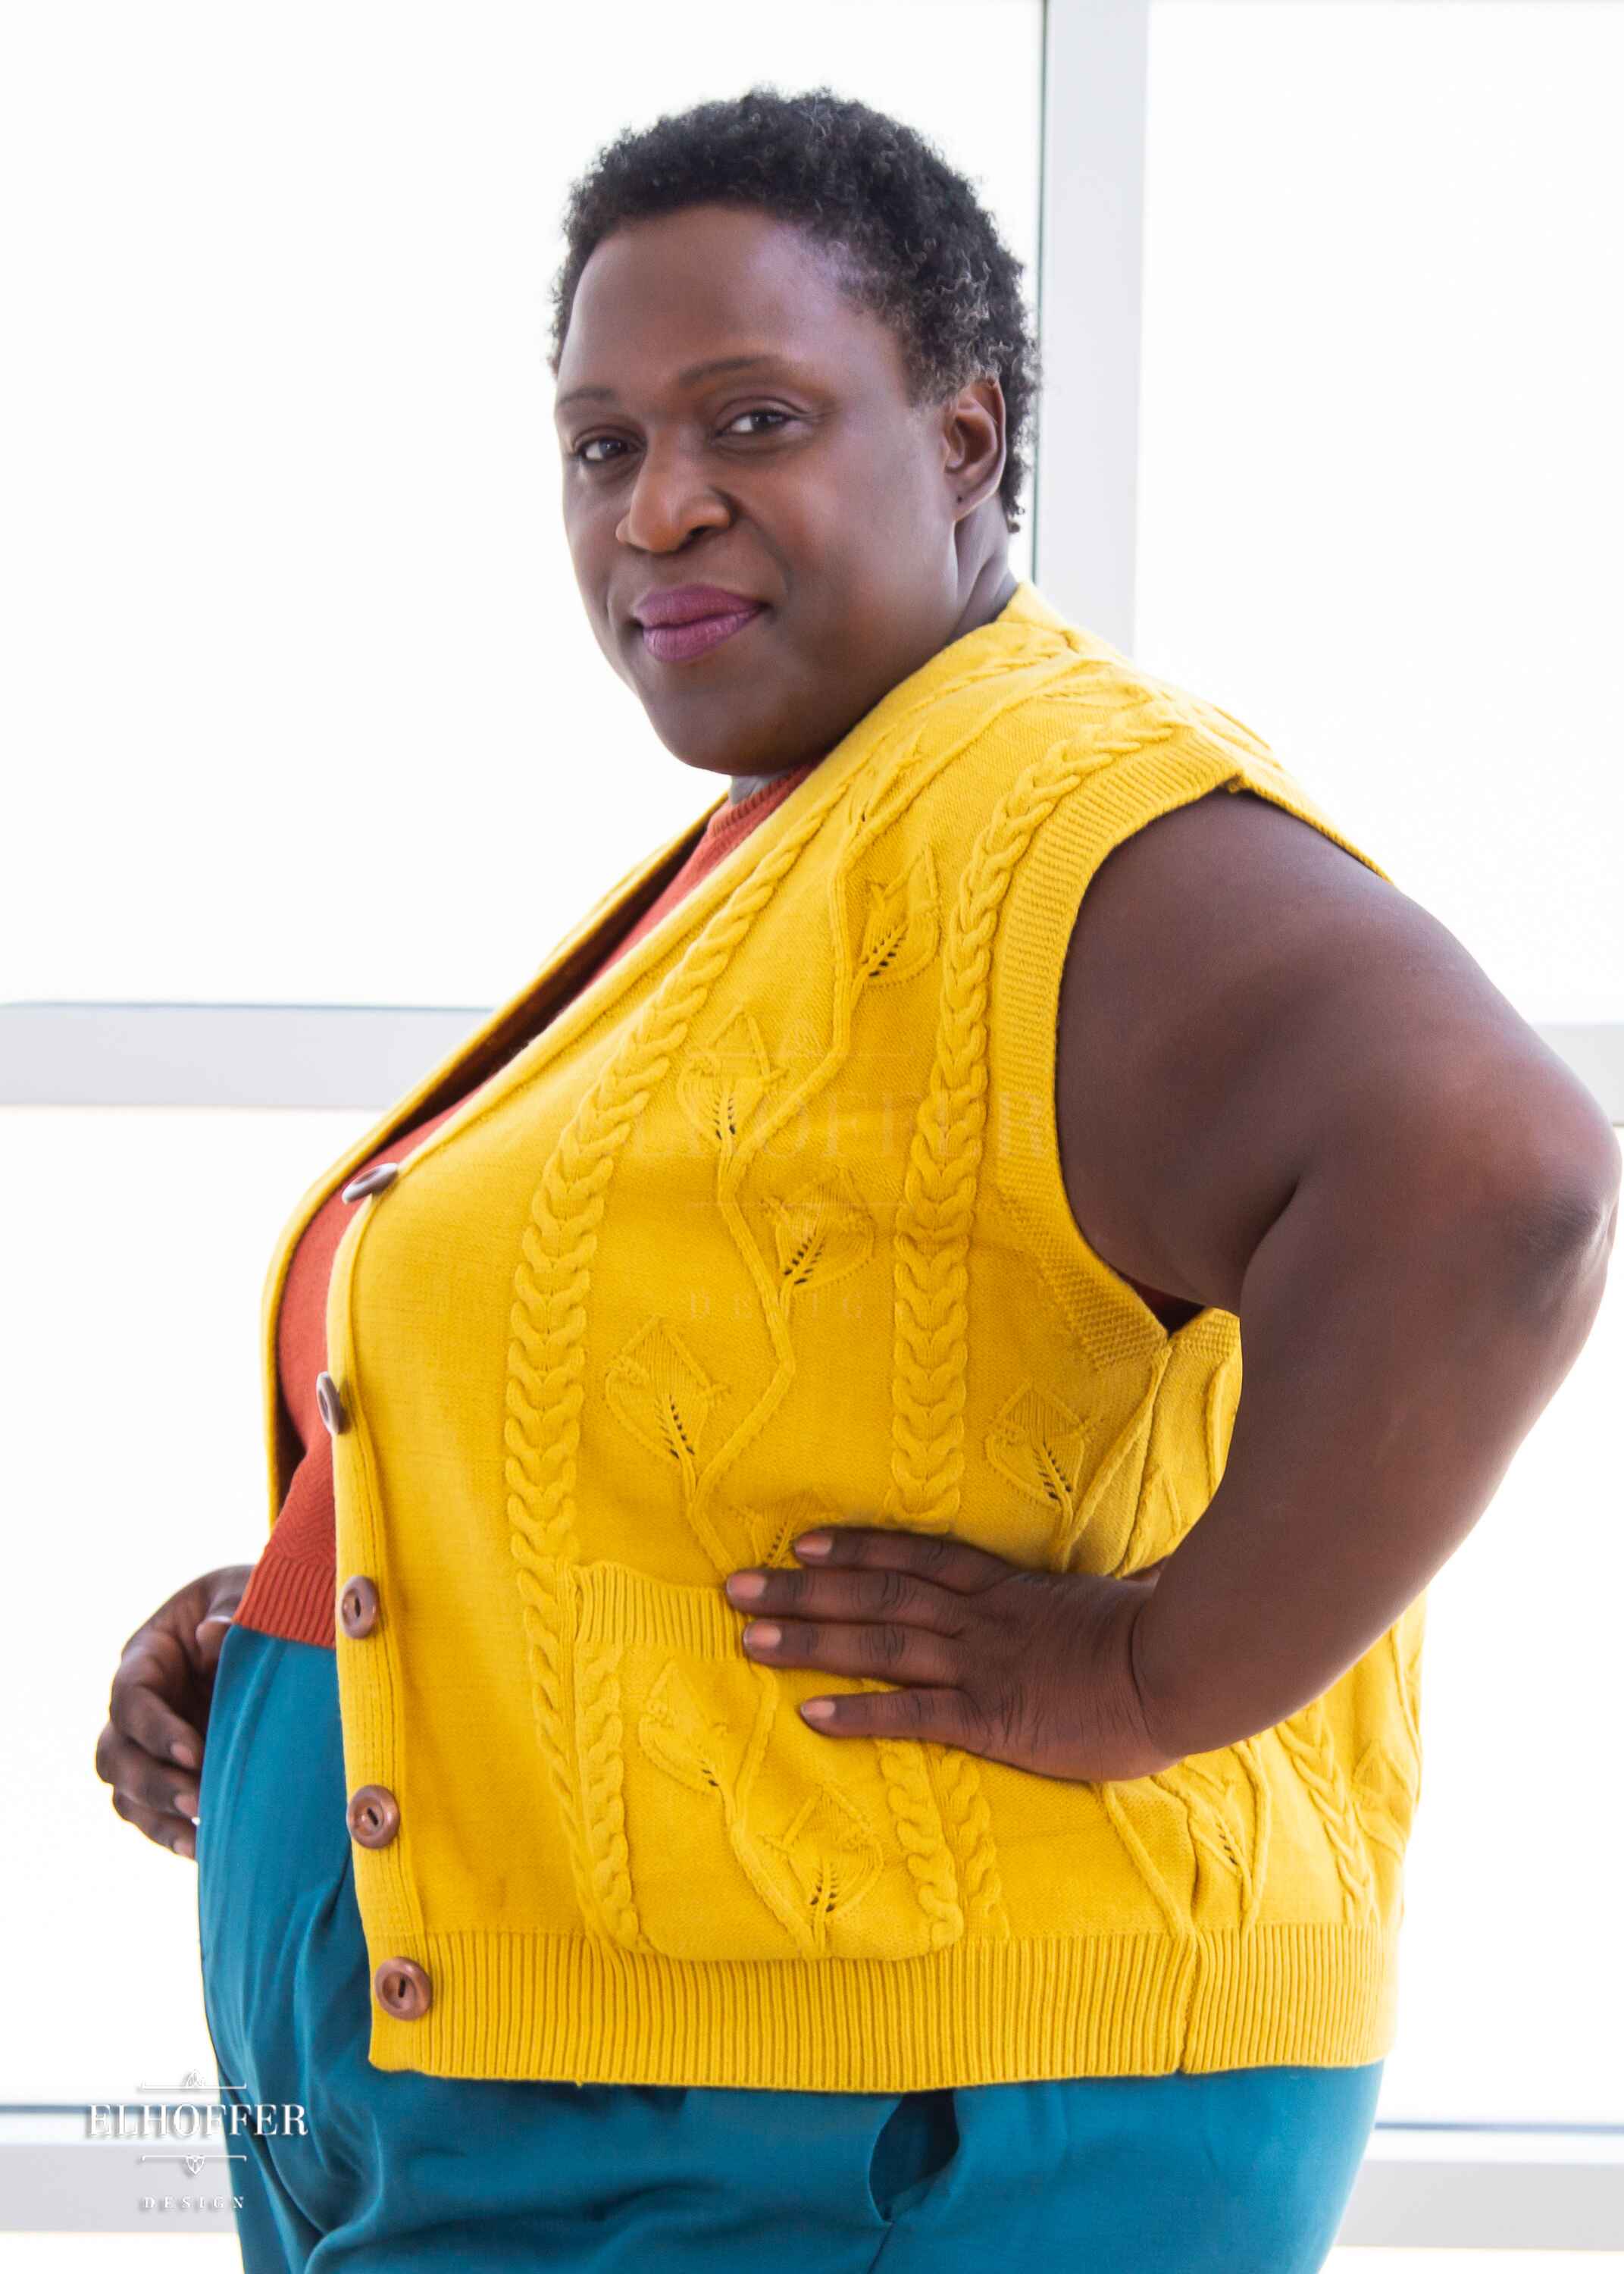 A side view of Adalgiza, a dark brown skinned 3xl model with short black tight curly hair, wearing a golden yellow button up knit vest with a leafy vine and cable knit pattern, light brown buttons, and front pockets. She paired the vest with a rust color knit crop top and peacock teal trousers.